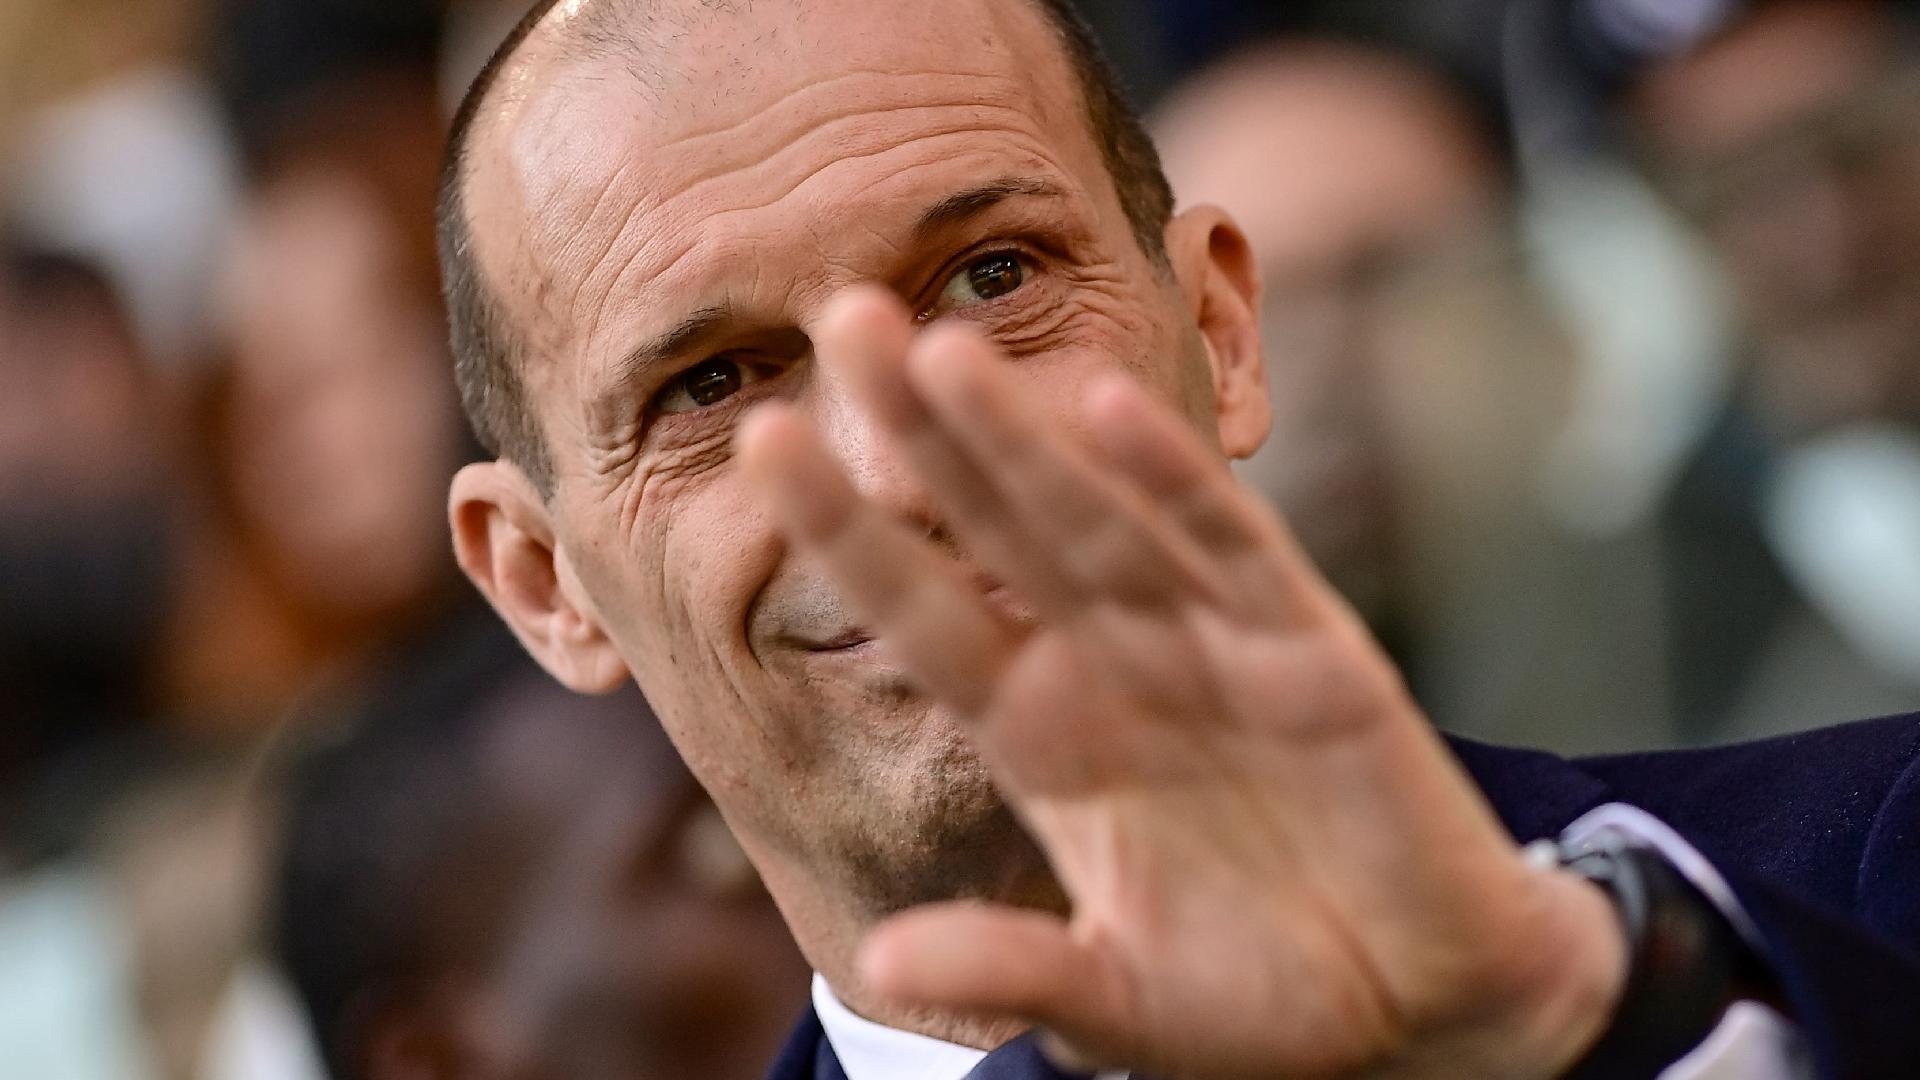 Massimiliano Allegri not underestimating Napoli as Juve look to end barren run